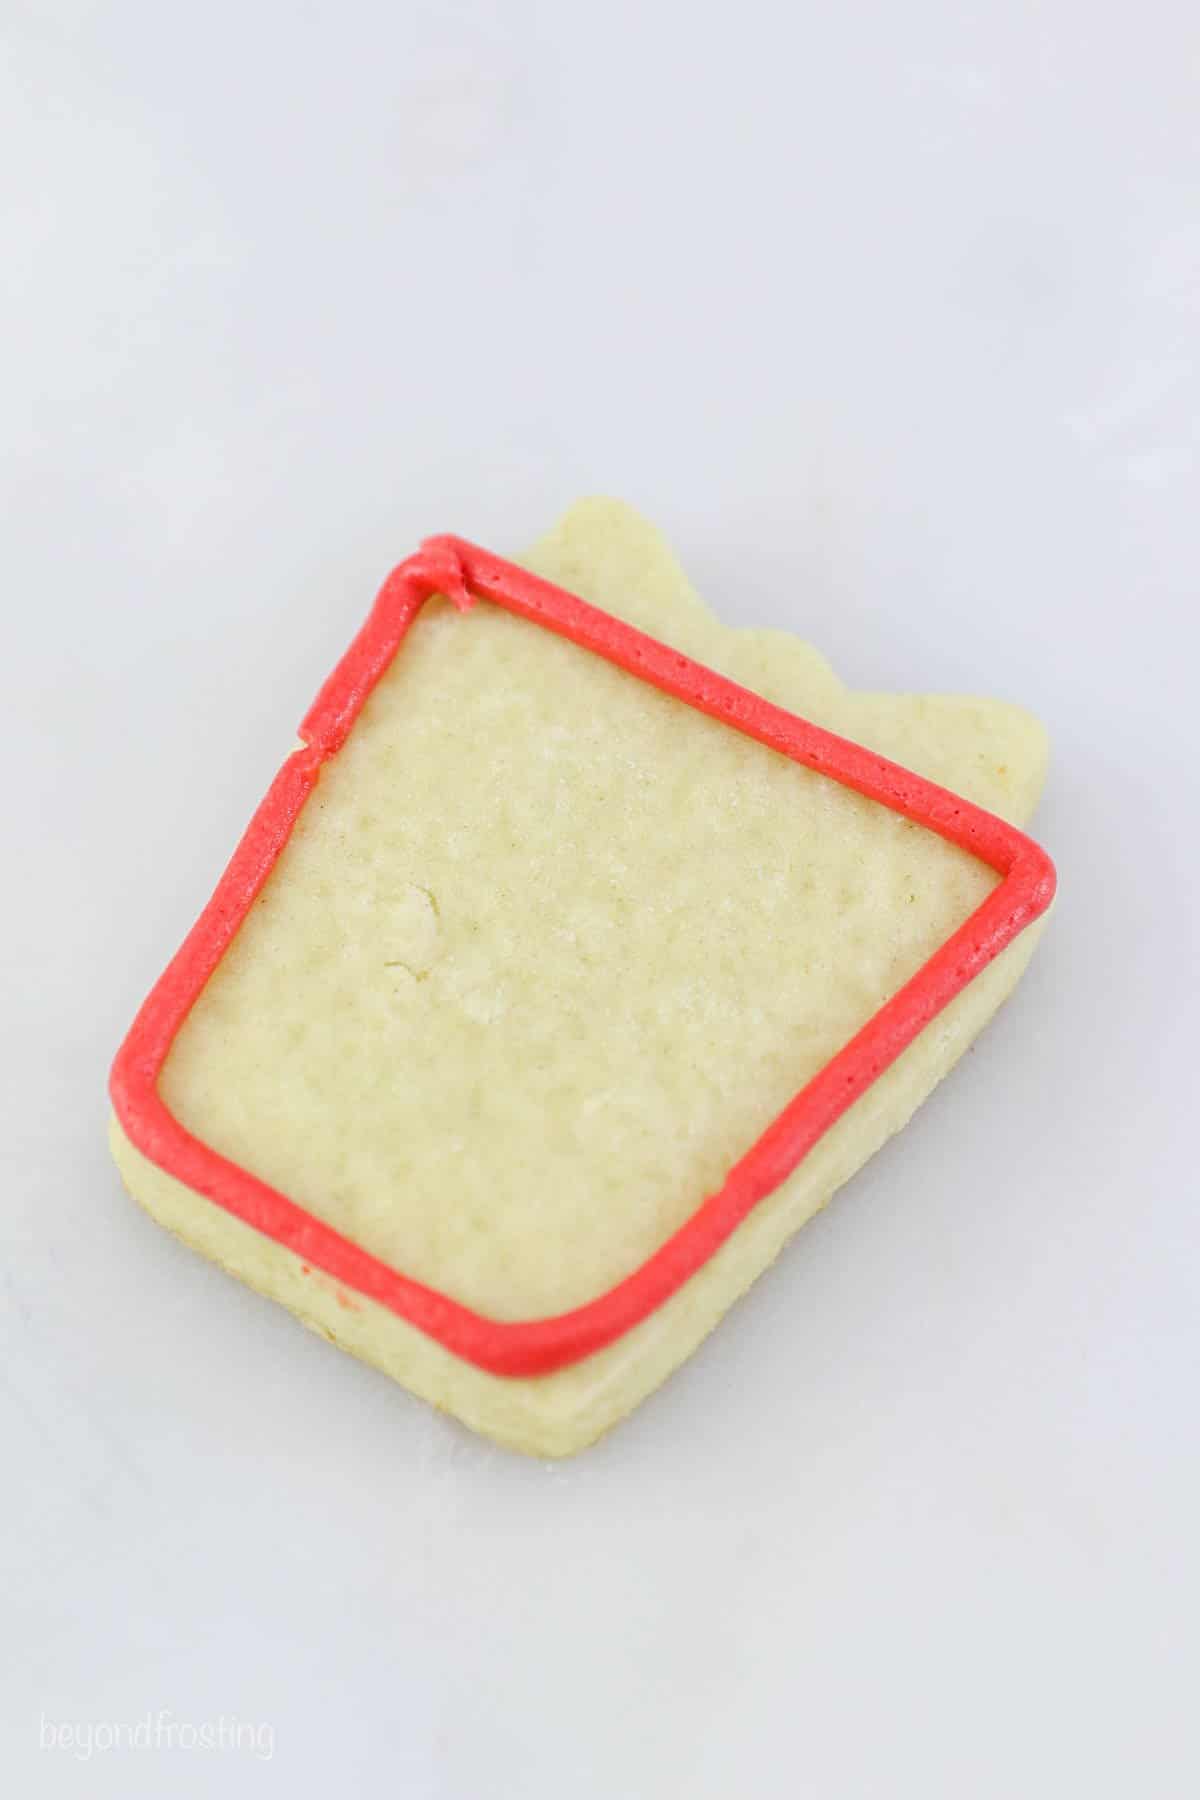 A red square outline on a Christmas cookie present